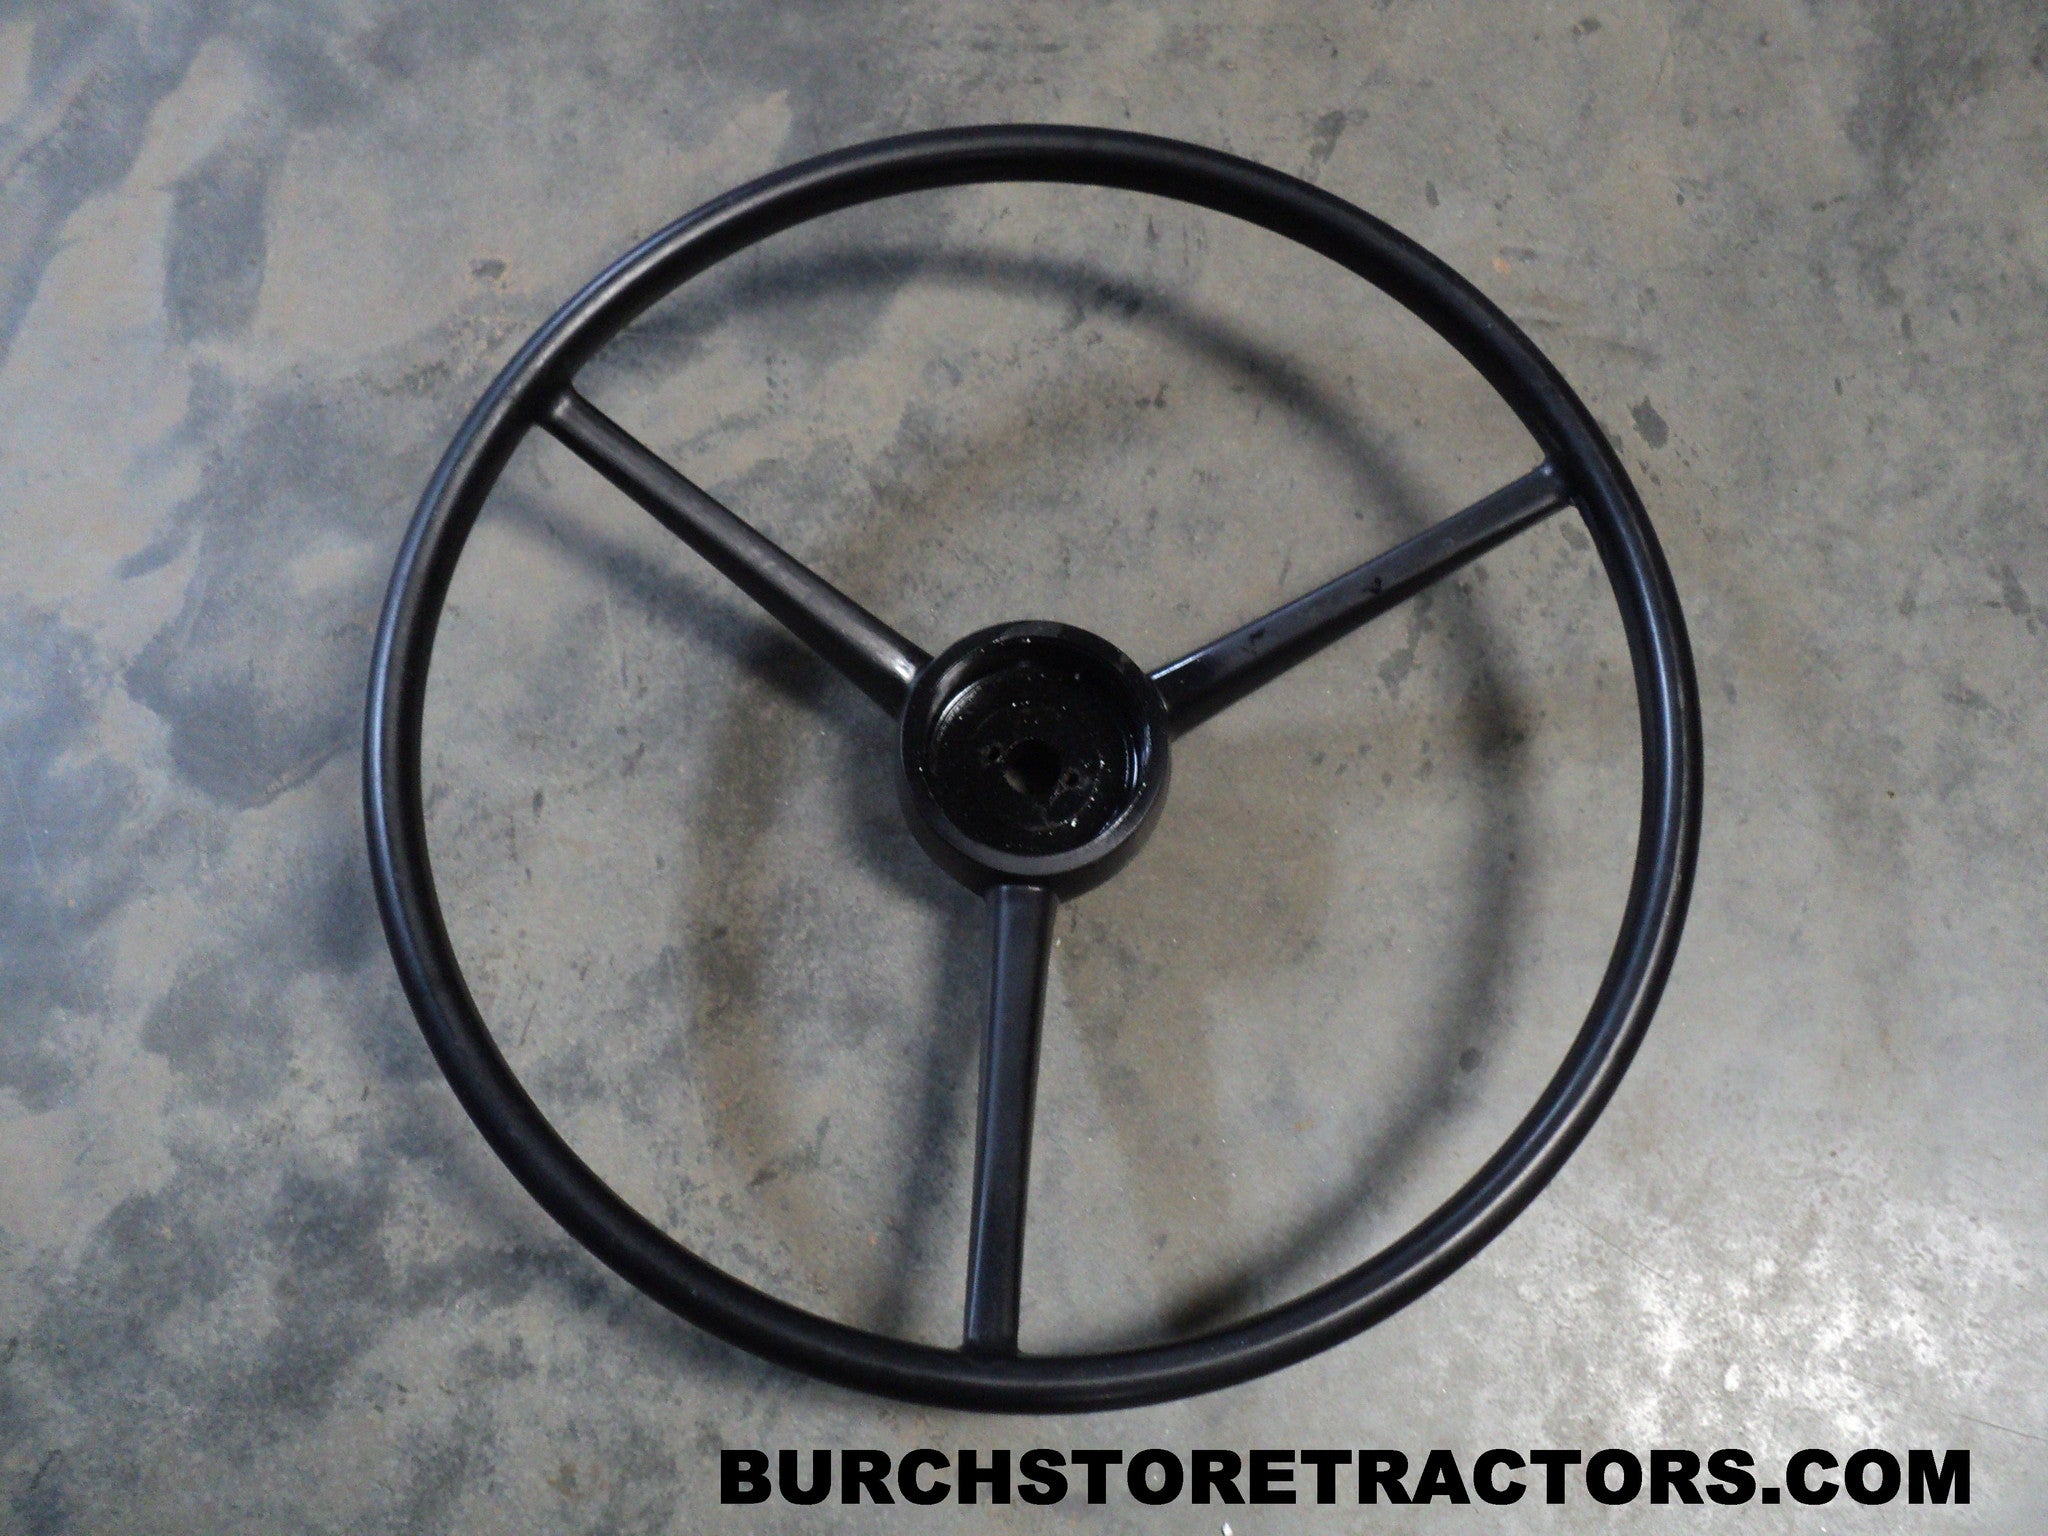 New 18 Inch Steering Wheel for Farmall 140, 240, 330, 340, 350, 404, 424,  444, 460, 504 Tractors